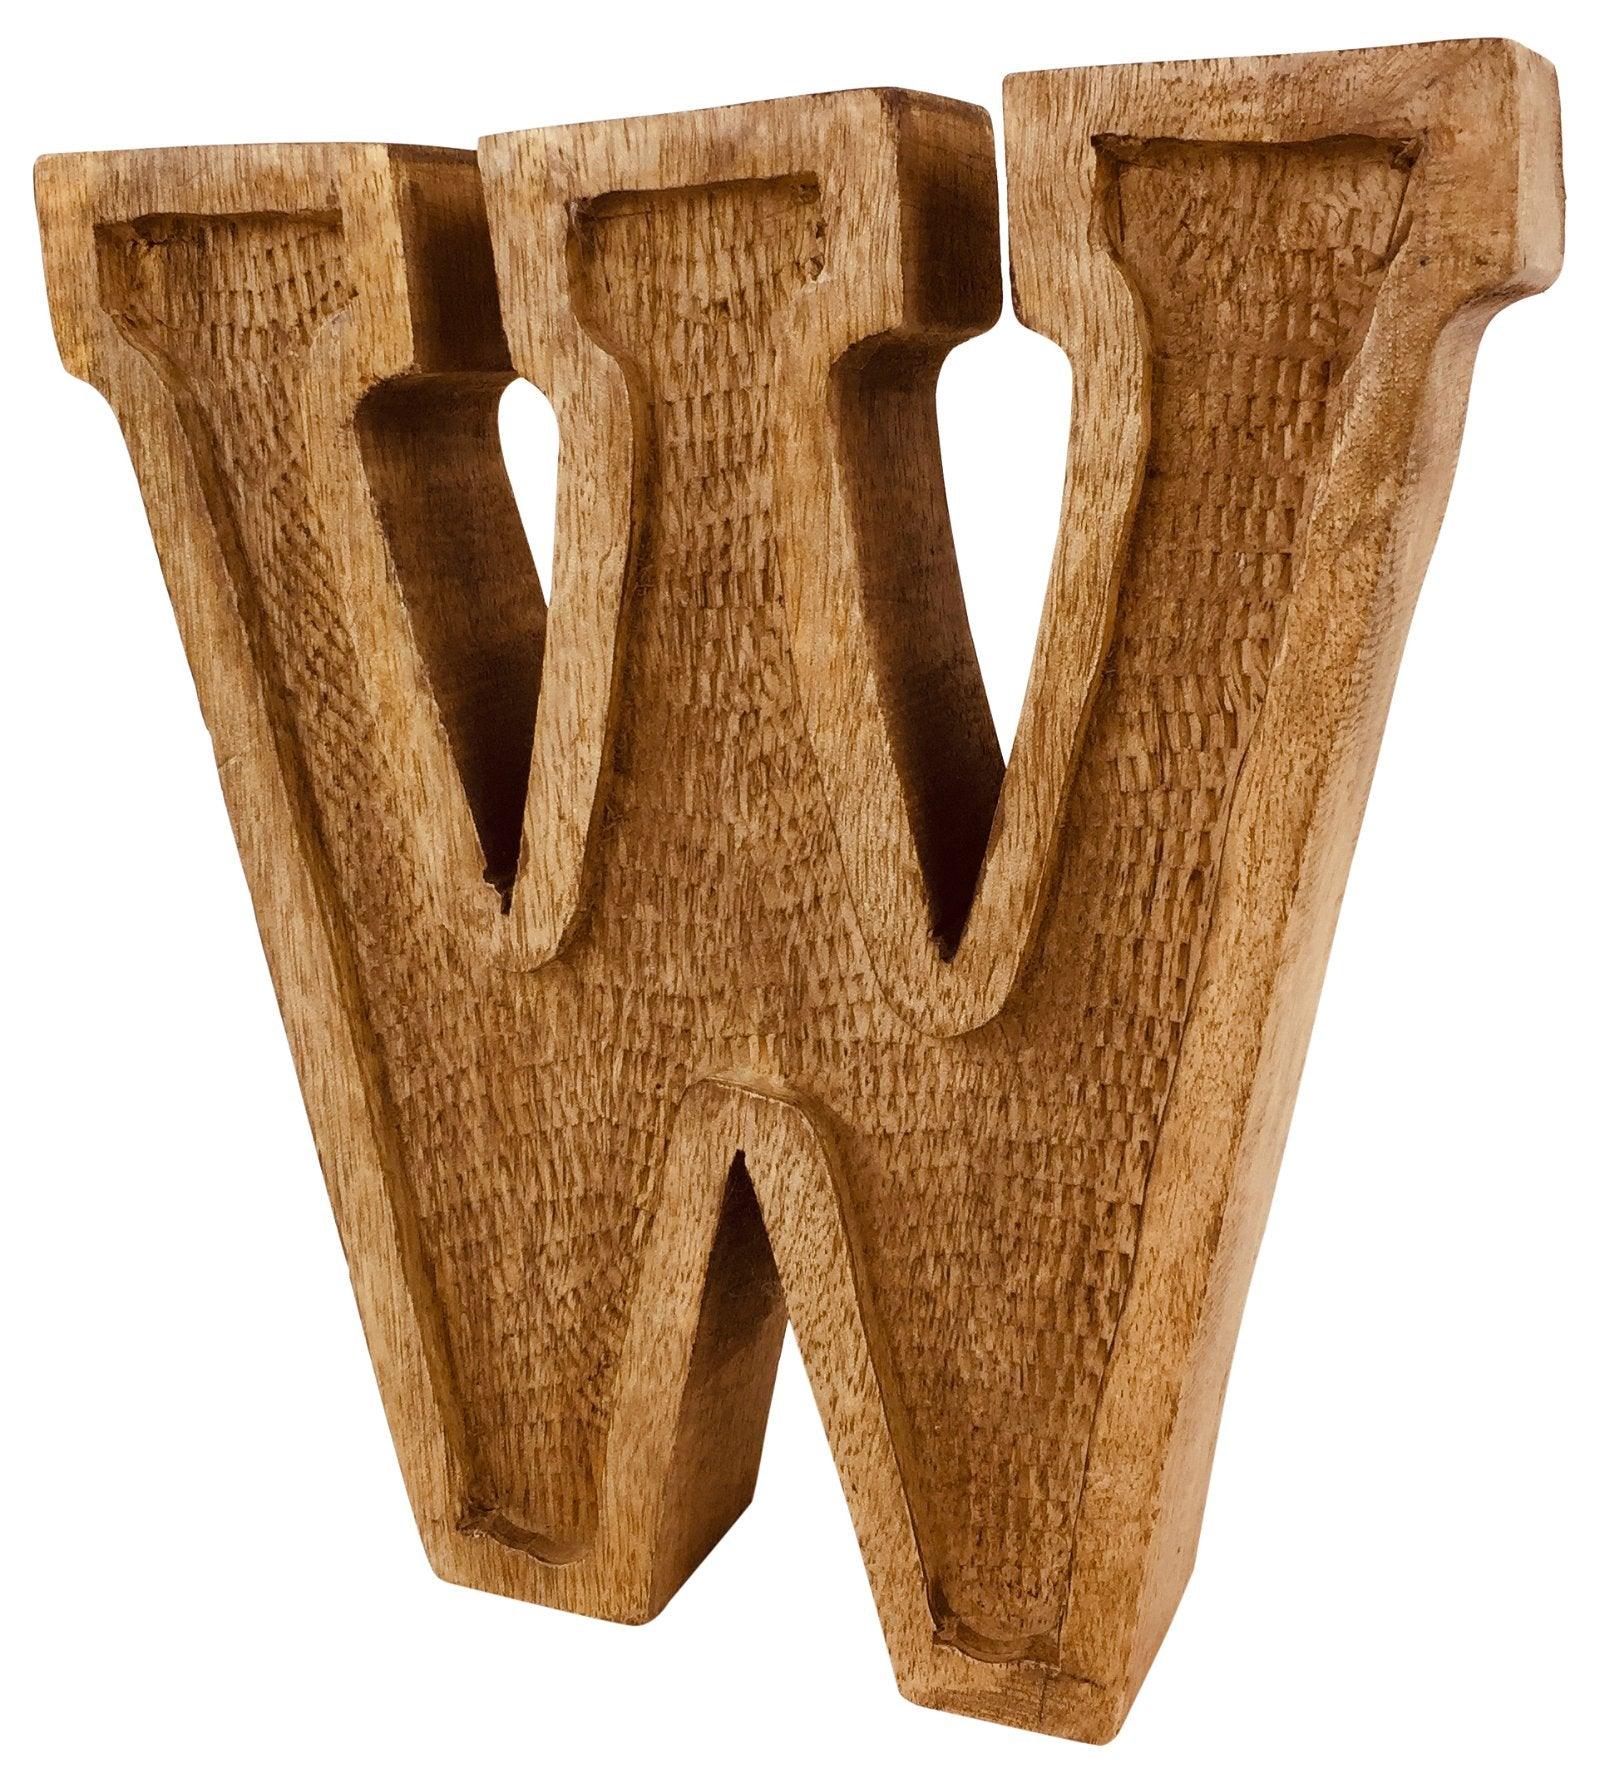 Hand Carved Wooden Embossed Letter W - £18.99 - Single Letters 